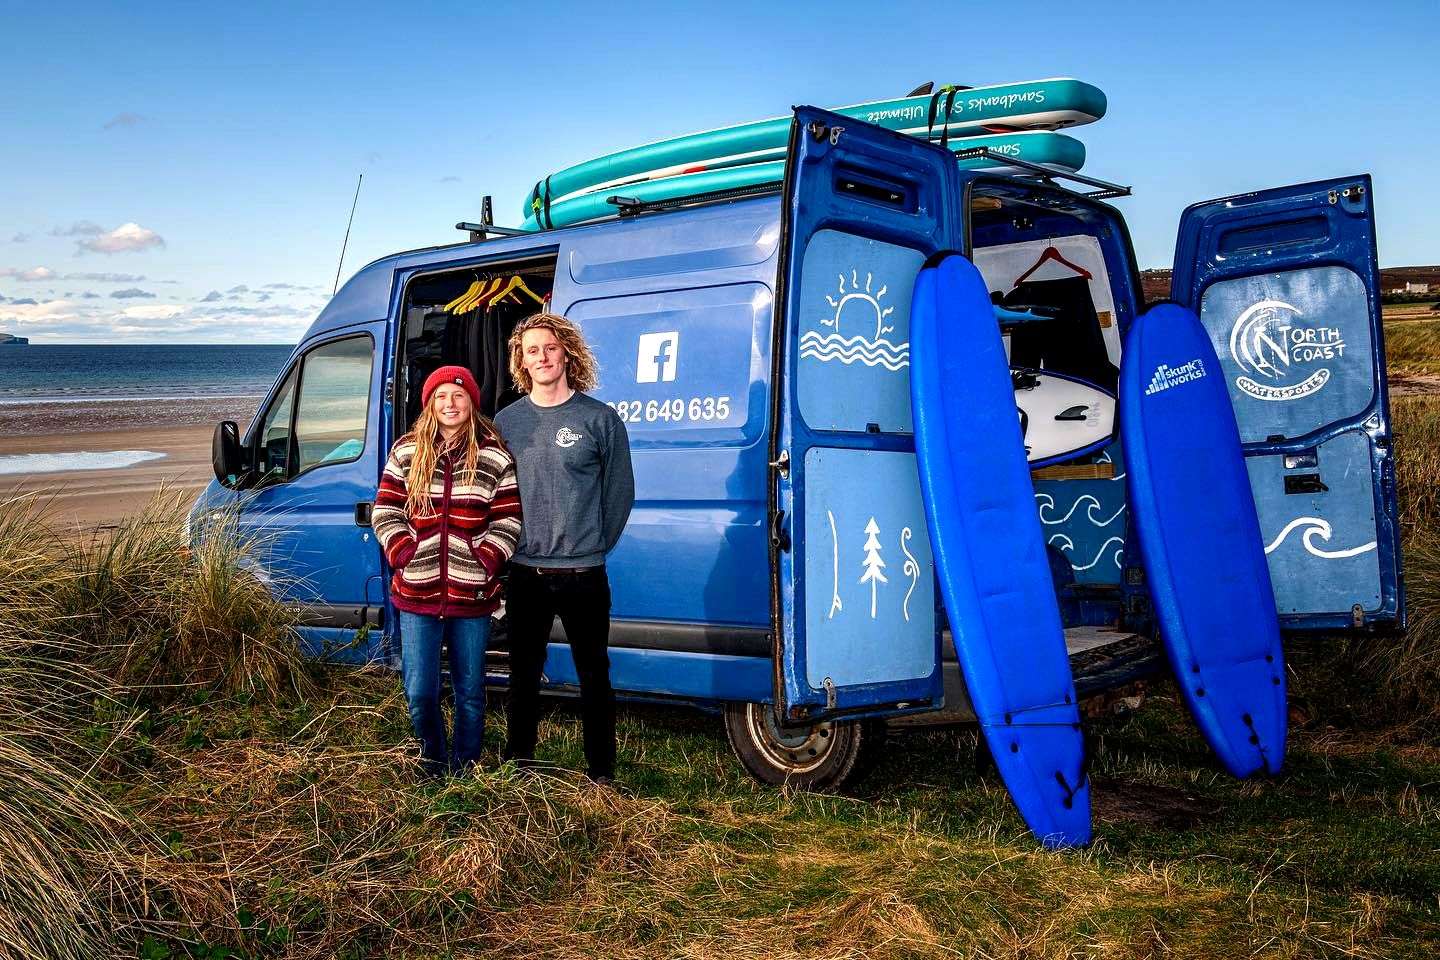 Iona McLachlan and Finn MacDonald set up North Coast Watersports in 2019.